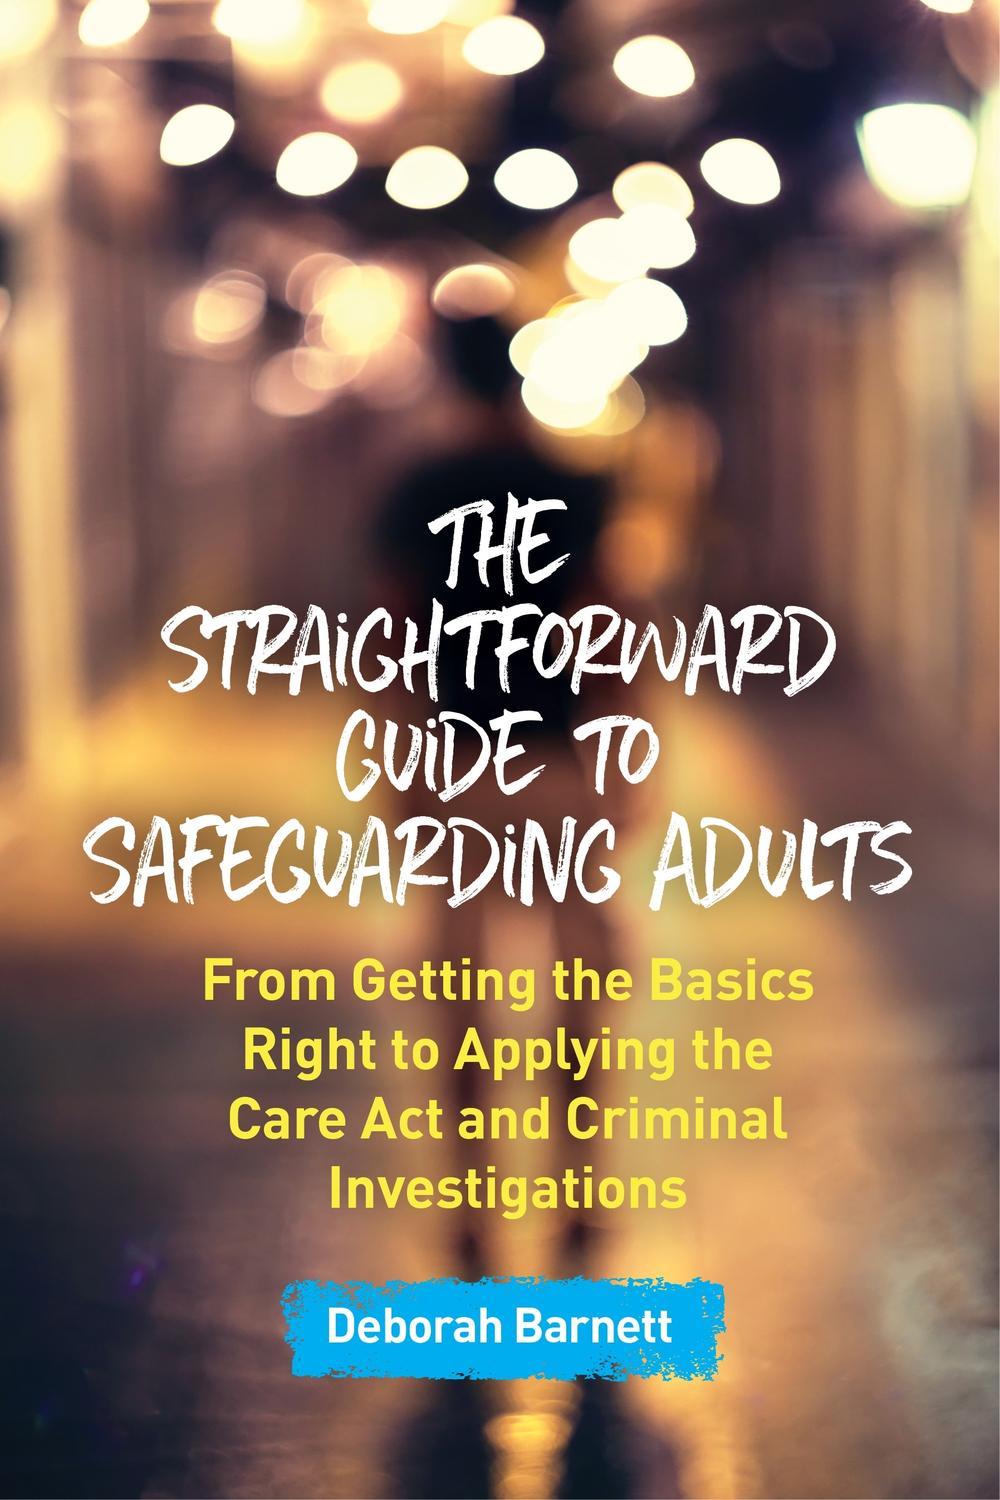 PDF] The Straightforward Guide to Safeguarding Adults by Deborah